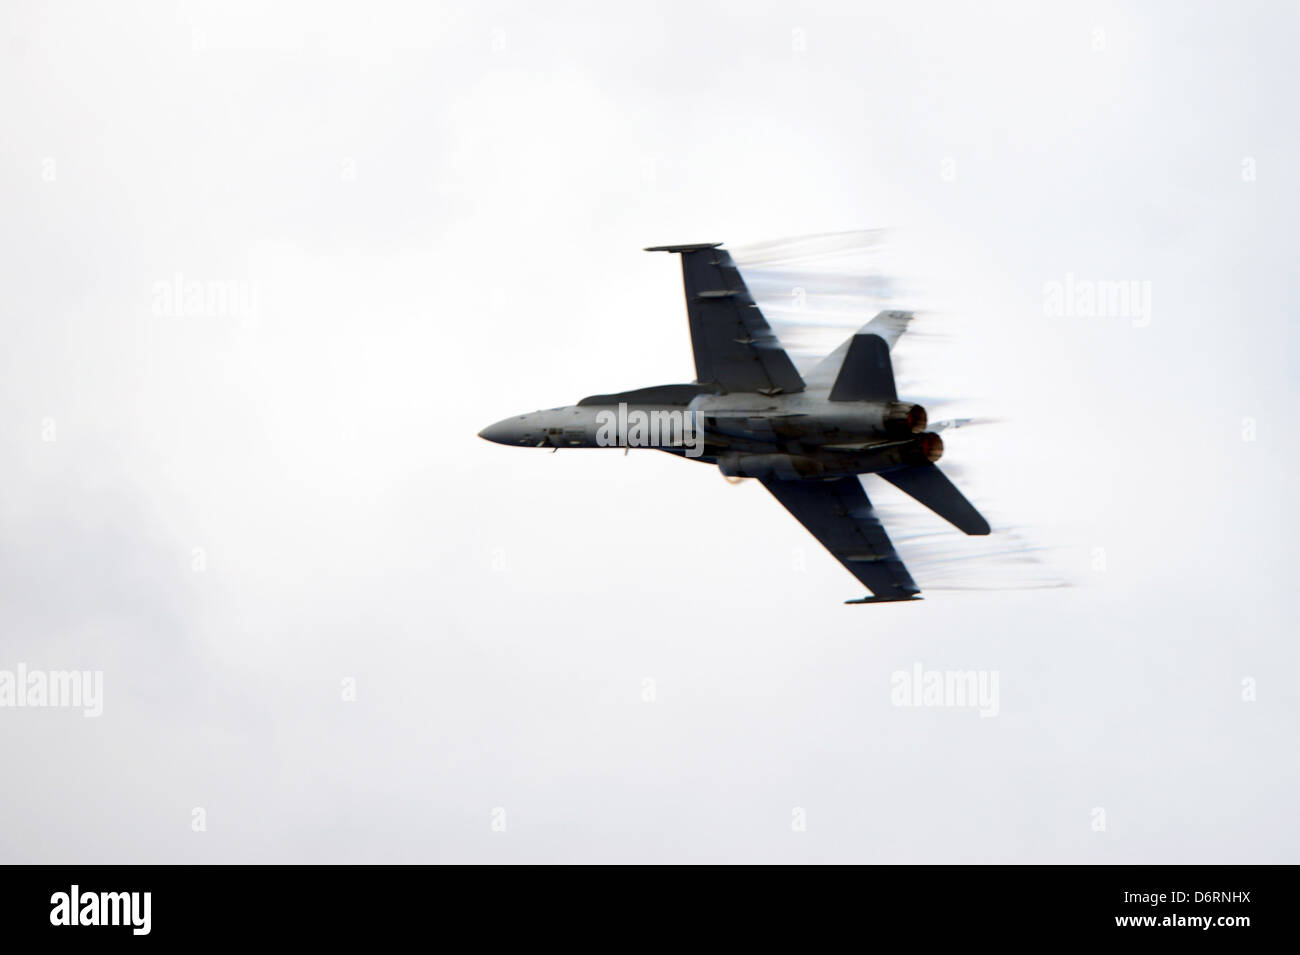 US Navy F/A-18C Hornet aircraft from the aircraft carrier USS John C. Stennis perform a high speed fly by April 23, 2013 in the Pacific Ocean. Stock Photo